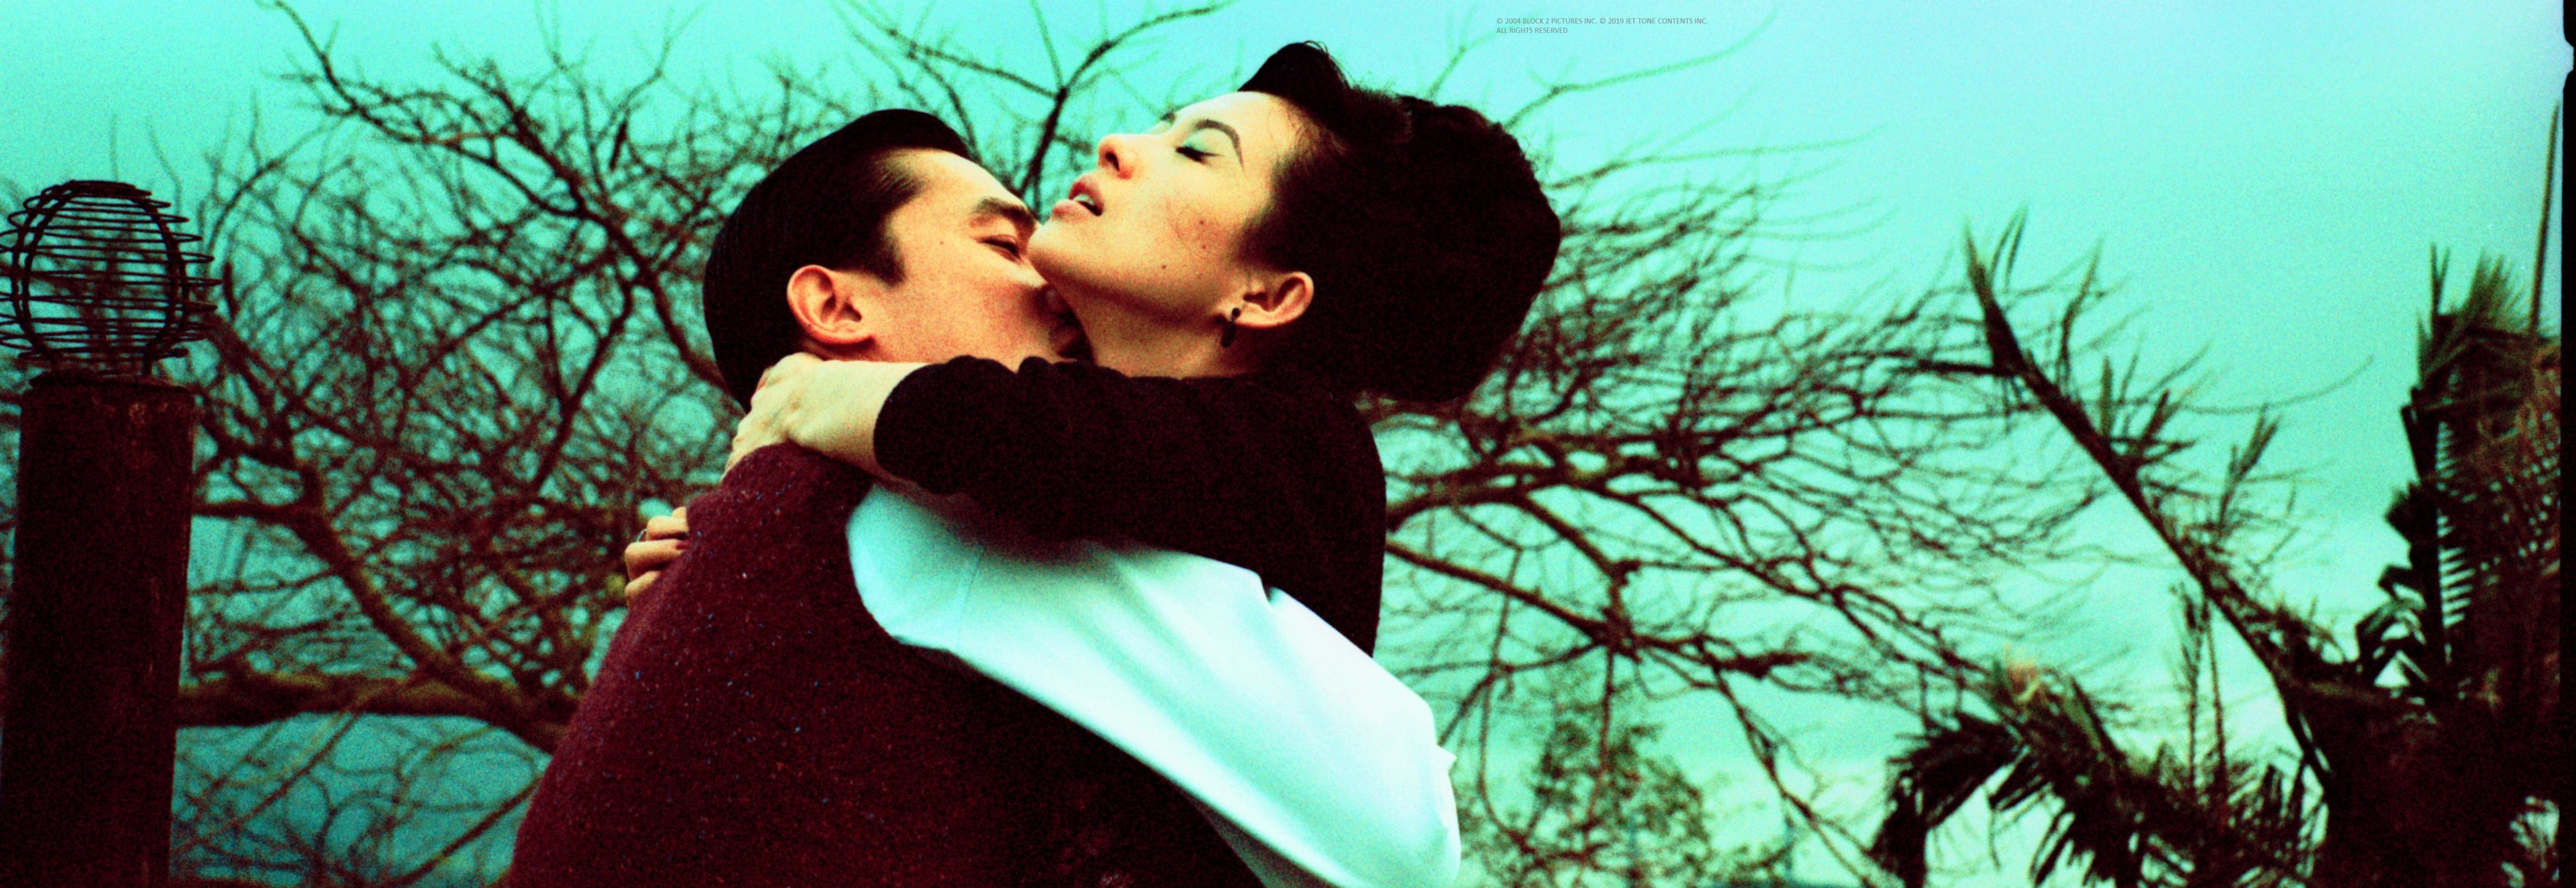 Tony Leung Chiu-wai (left) and Zhang Ziyi in a still from “2046”. Photo: Block 2 Pictures and Jet Tone Contents